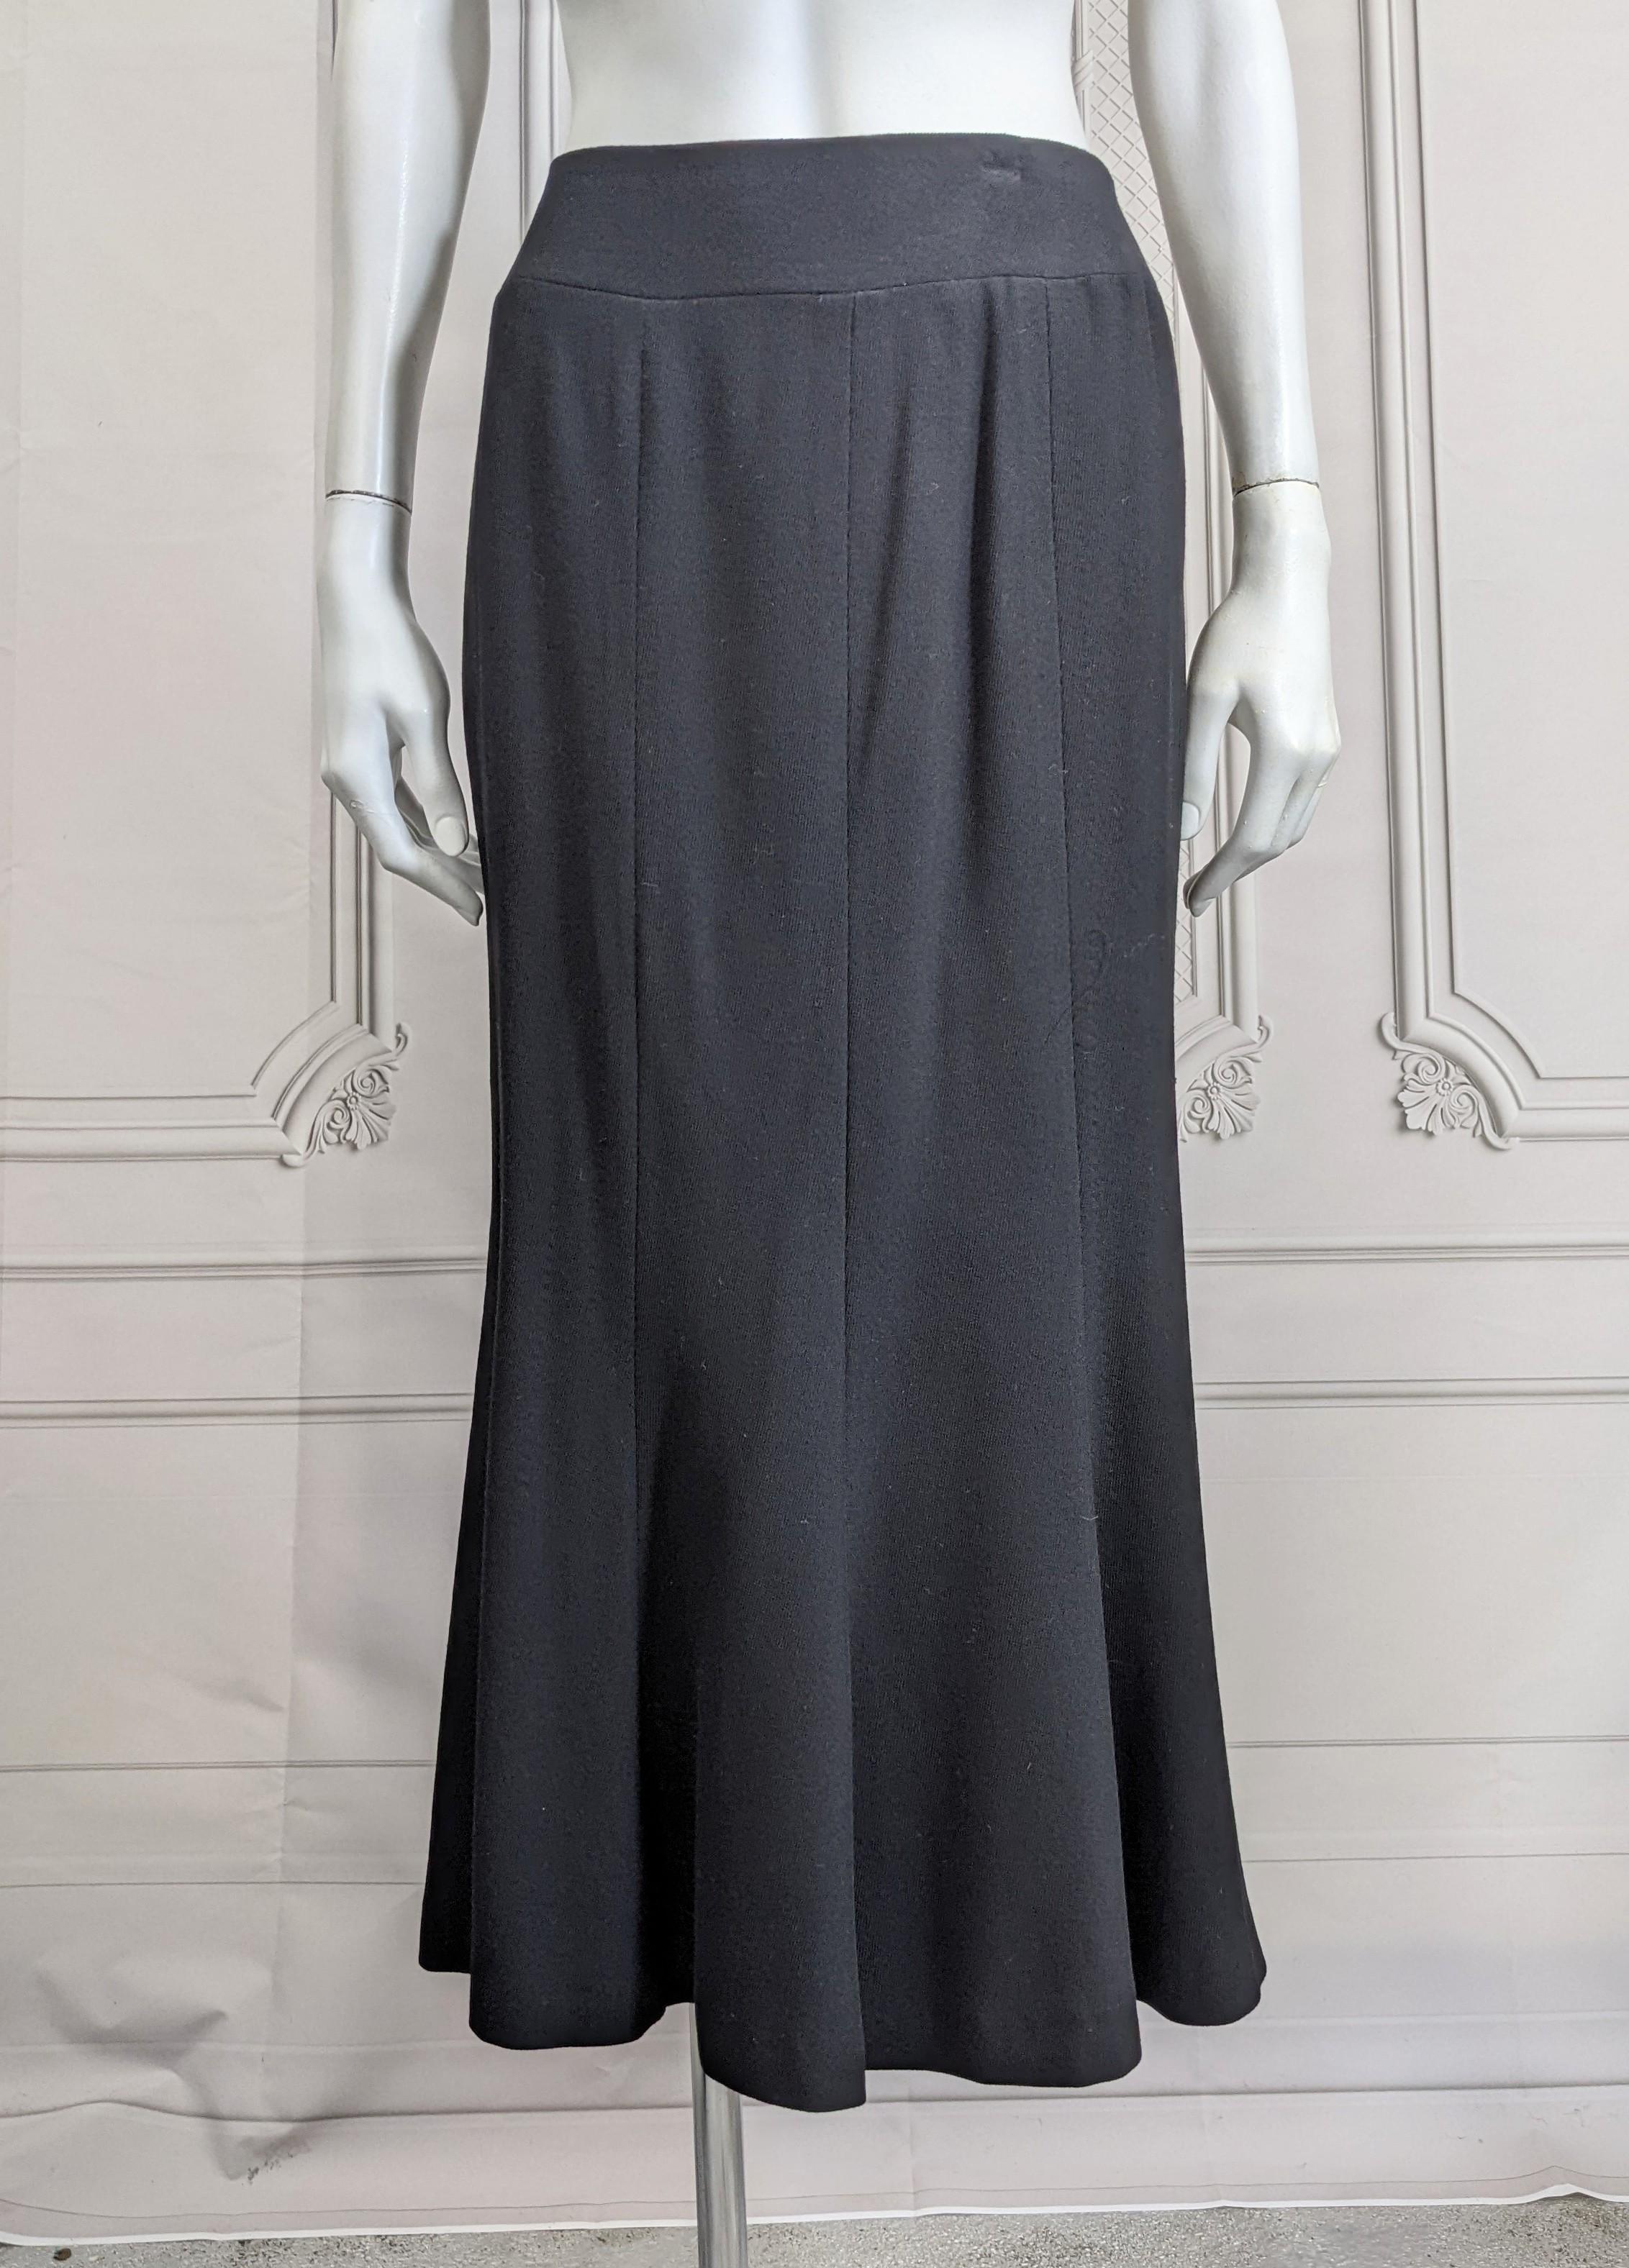 Chanel Soft Deep Black Wool Twill Fit and Flare Trumpet Skirt from the 1990's. Pieced with a hip yoke and 3 panel front and back which release to fullness at knee. Back zip with silk lining. Size 38 Vintage, 1990's France. 
Waist 26